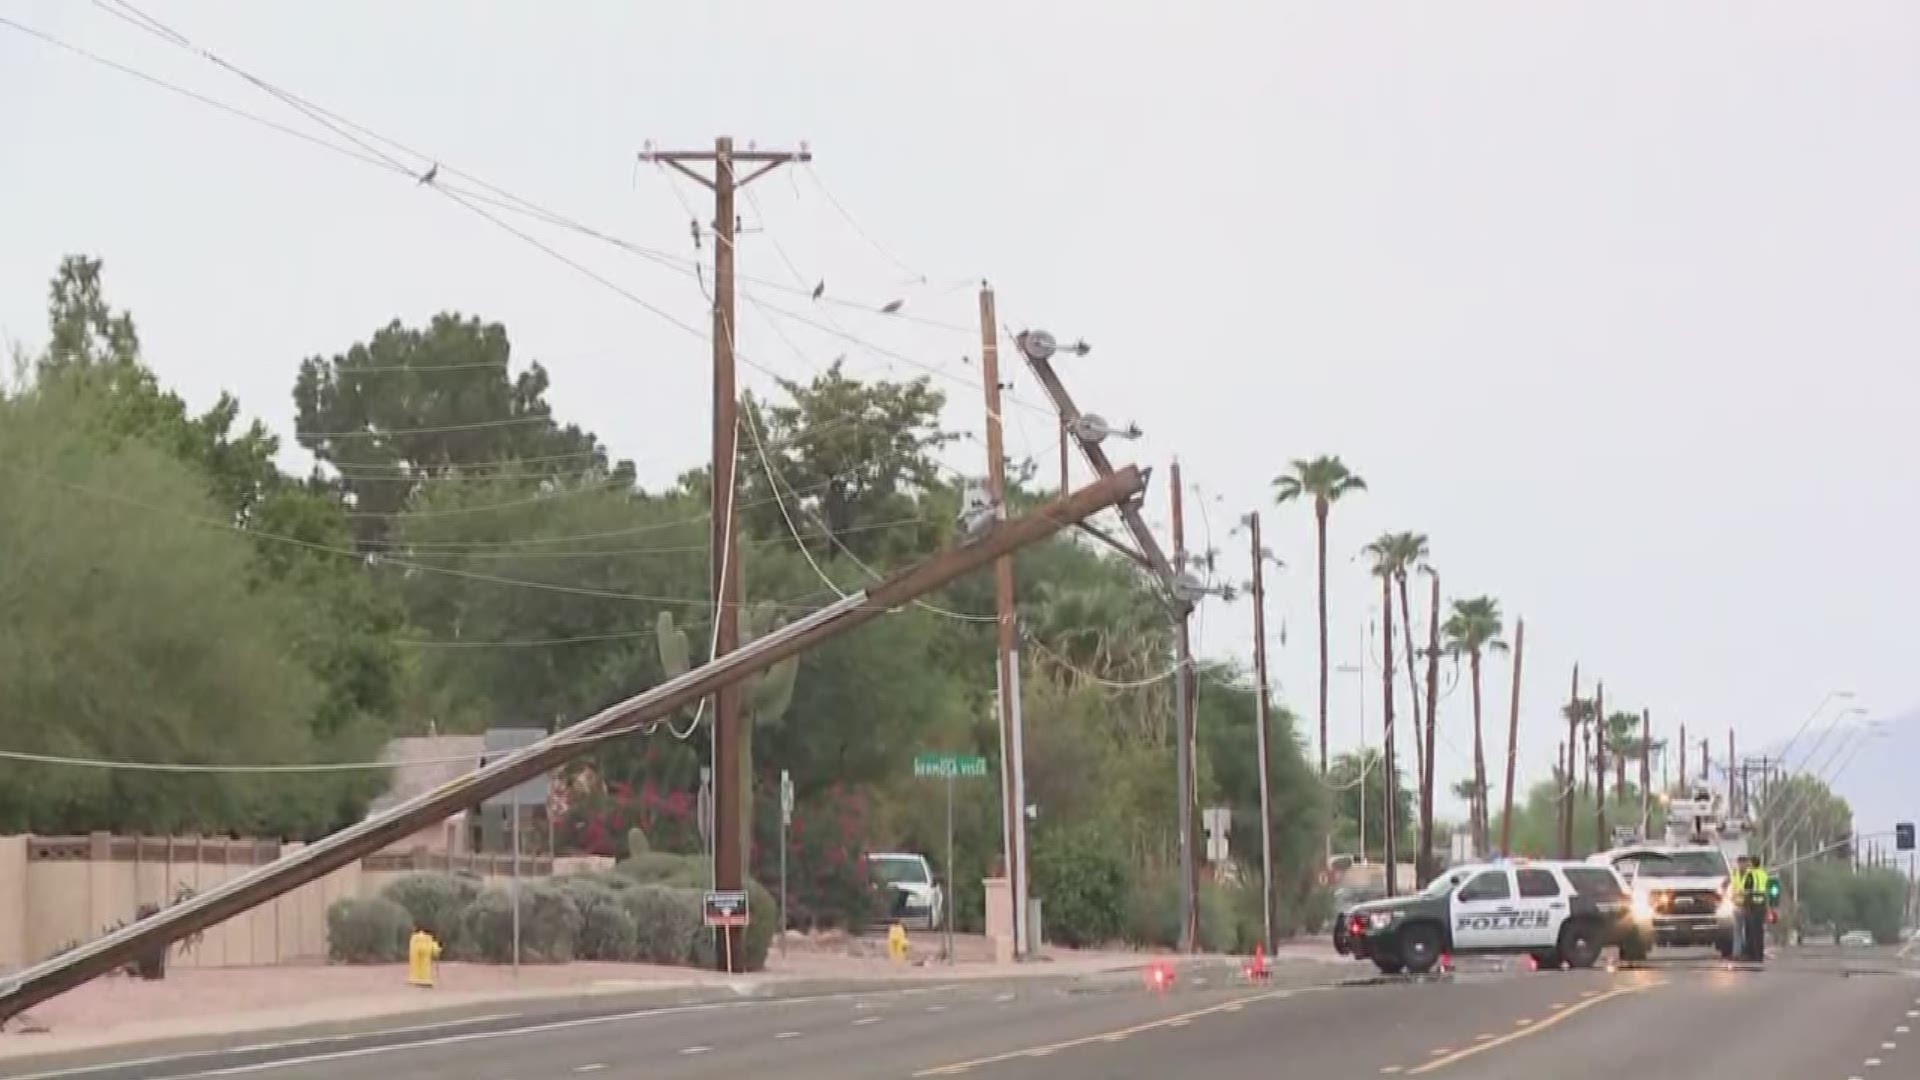 A power pole is down at Signal Butte and the 202 in East Mesa. Strong winds are likely the cause of the power pole going down.